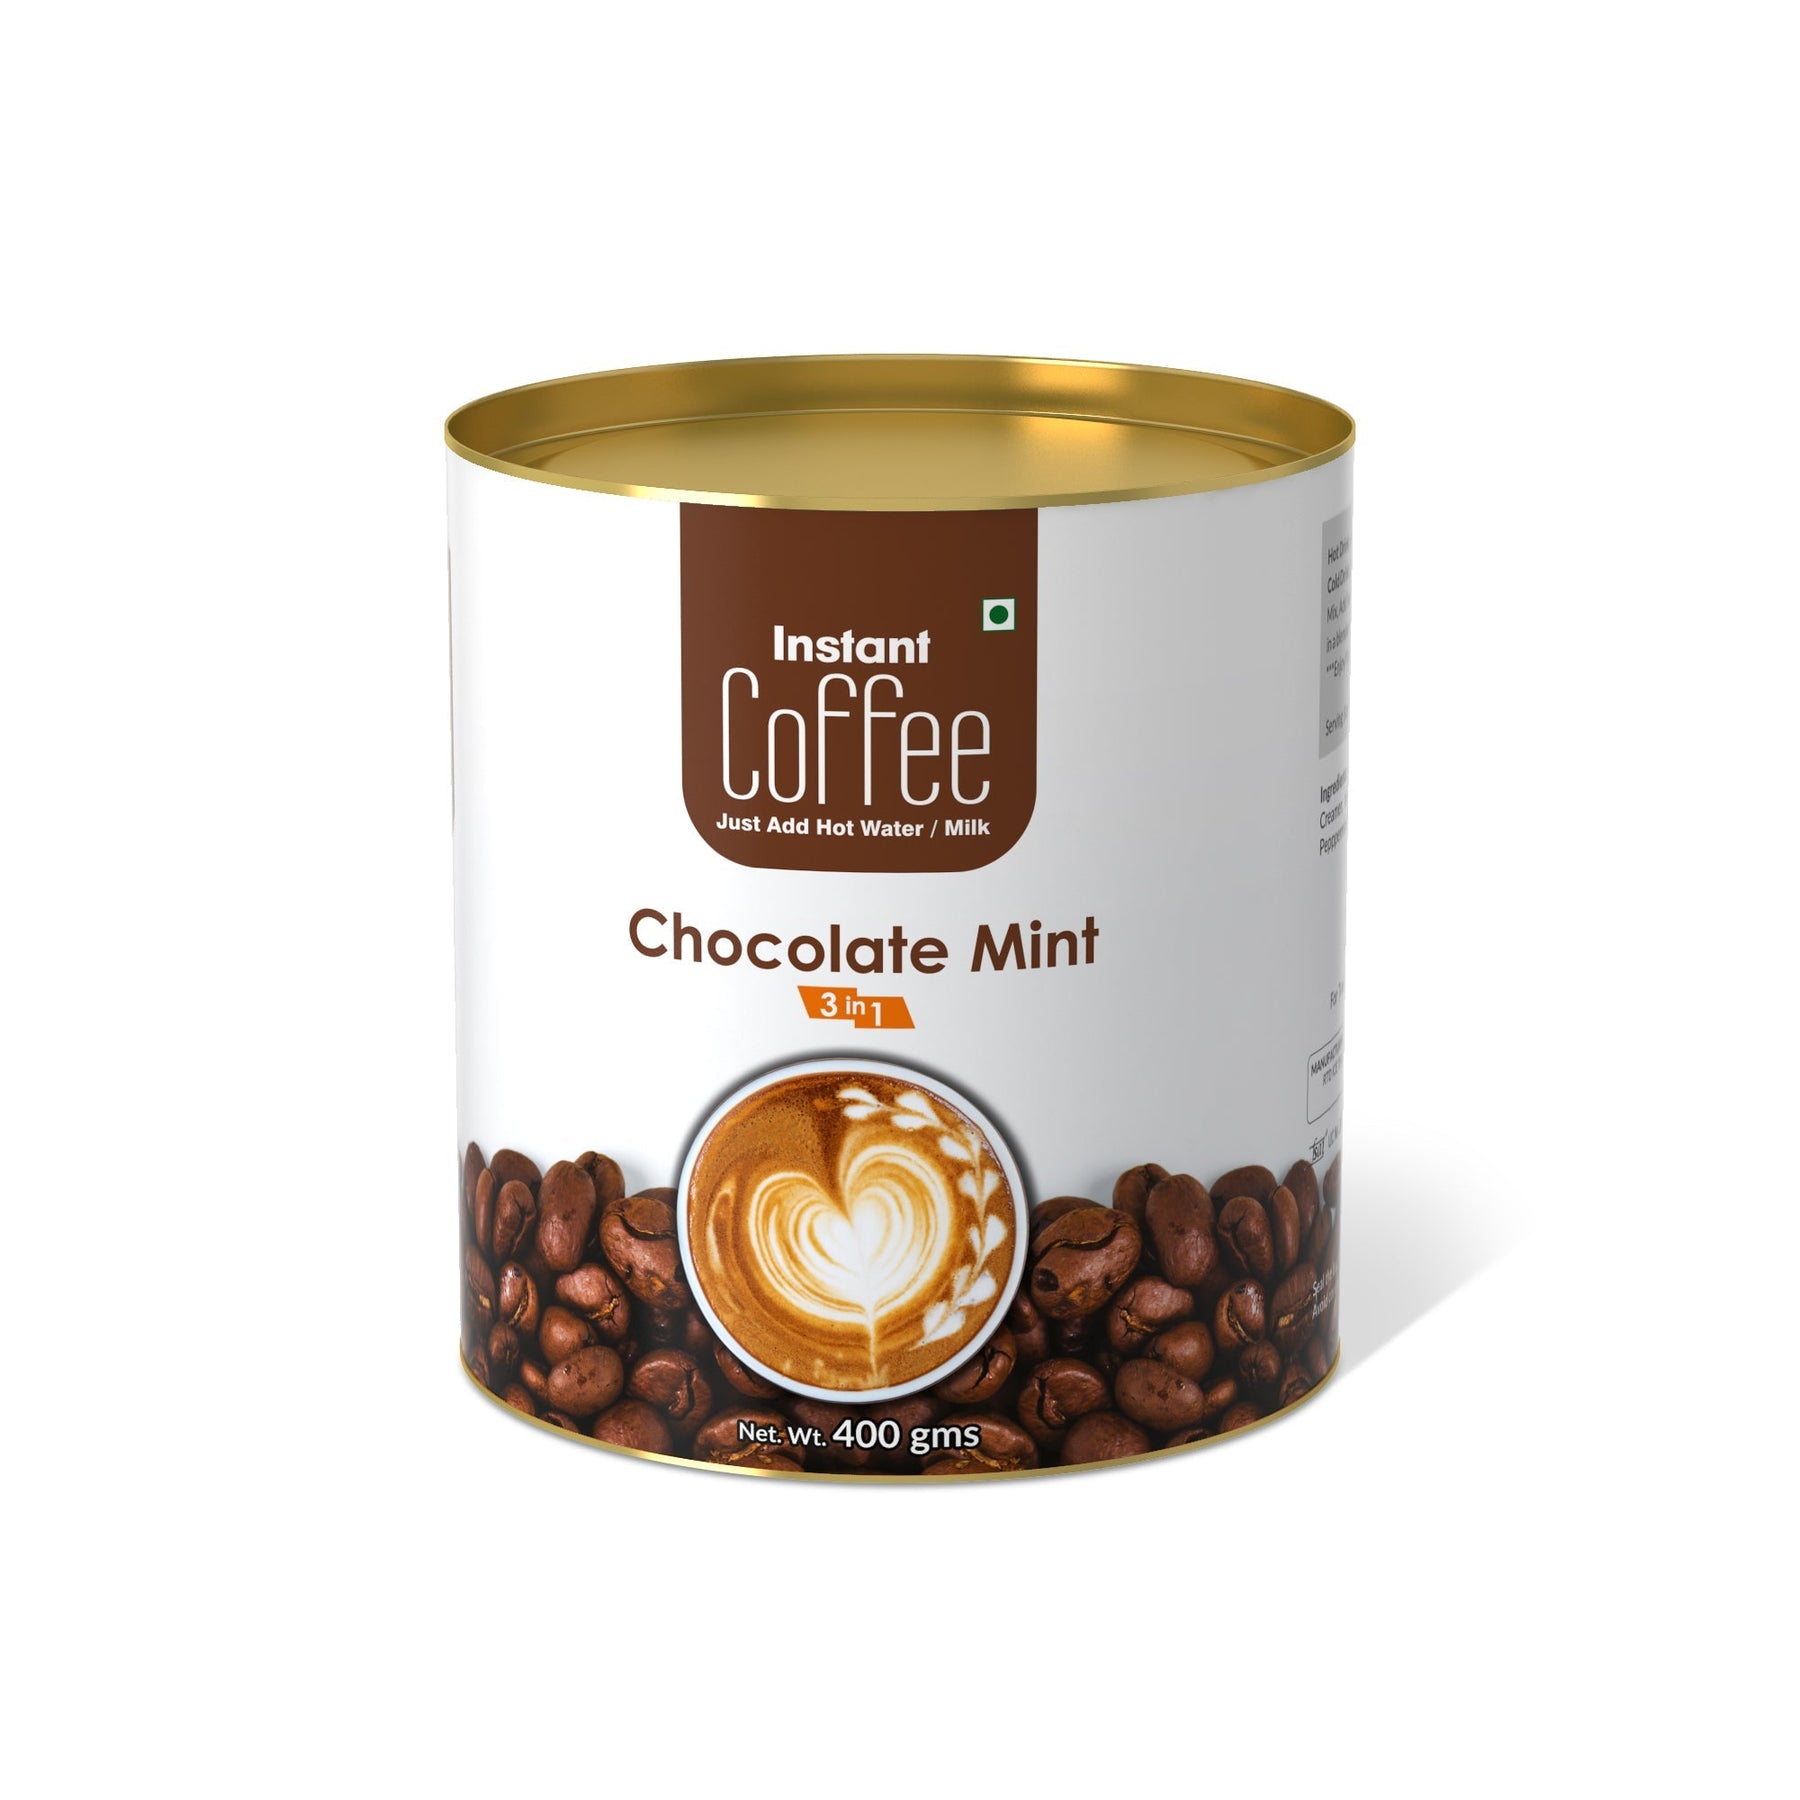 Chocolate Mint Instant Coffee Premix (3 in 1) - 400 gms